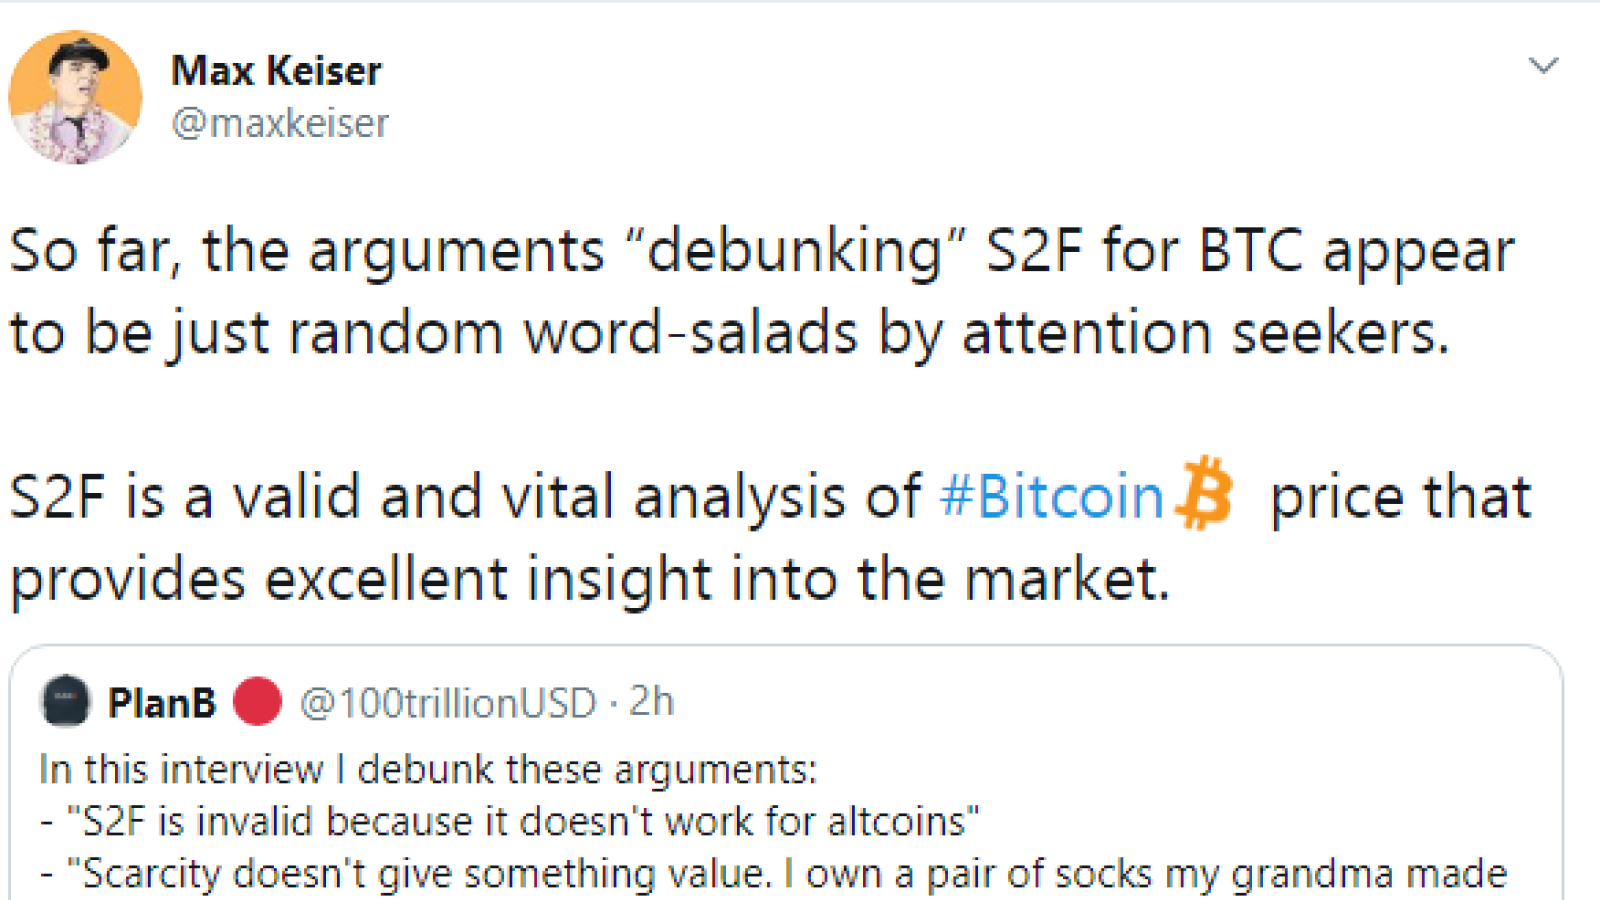 Max Keiser supports Bitcoin (BTC) stock-to-flow model